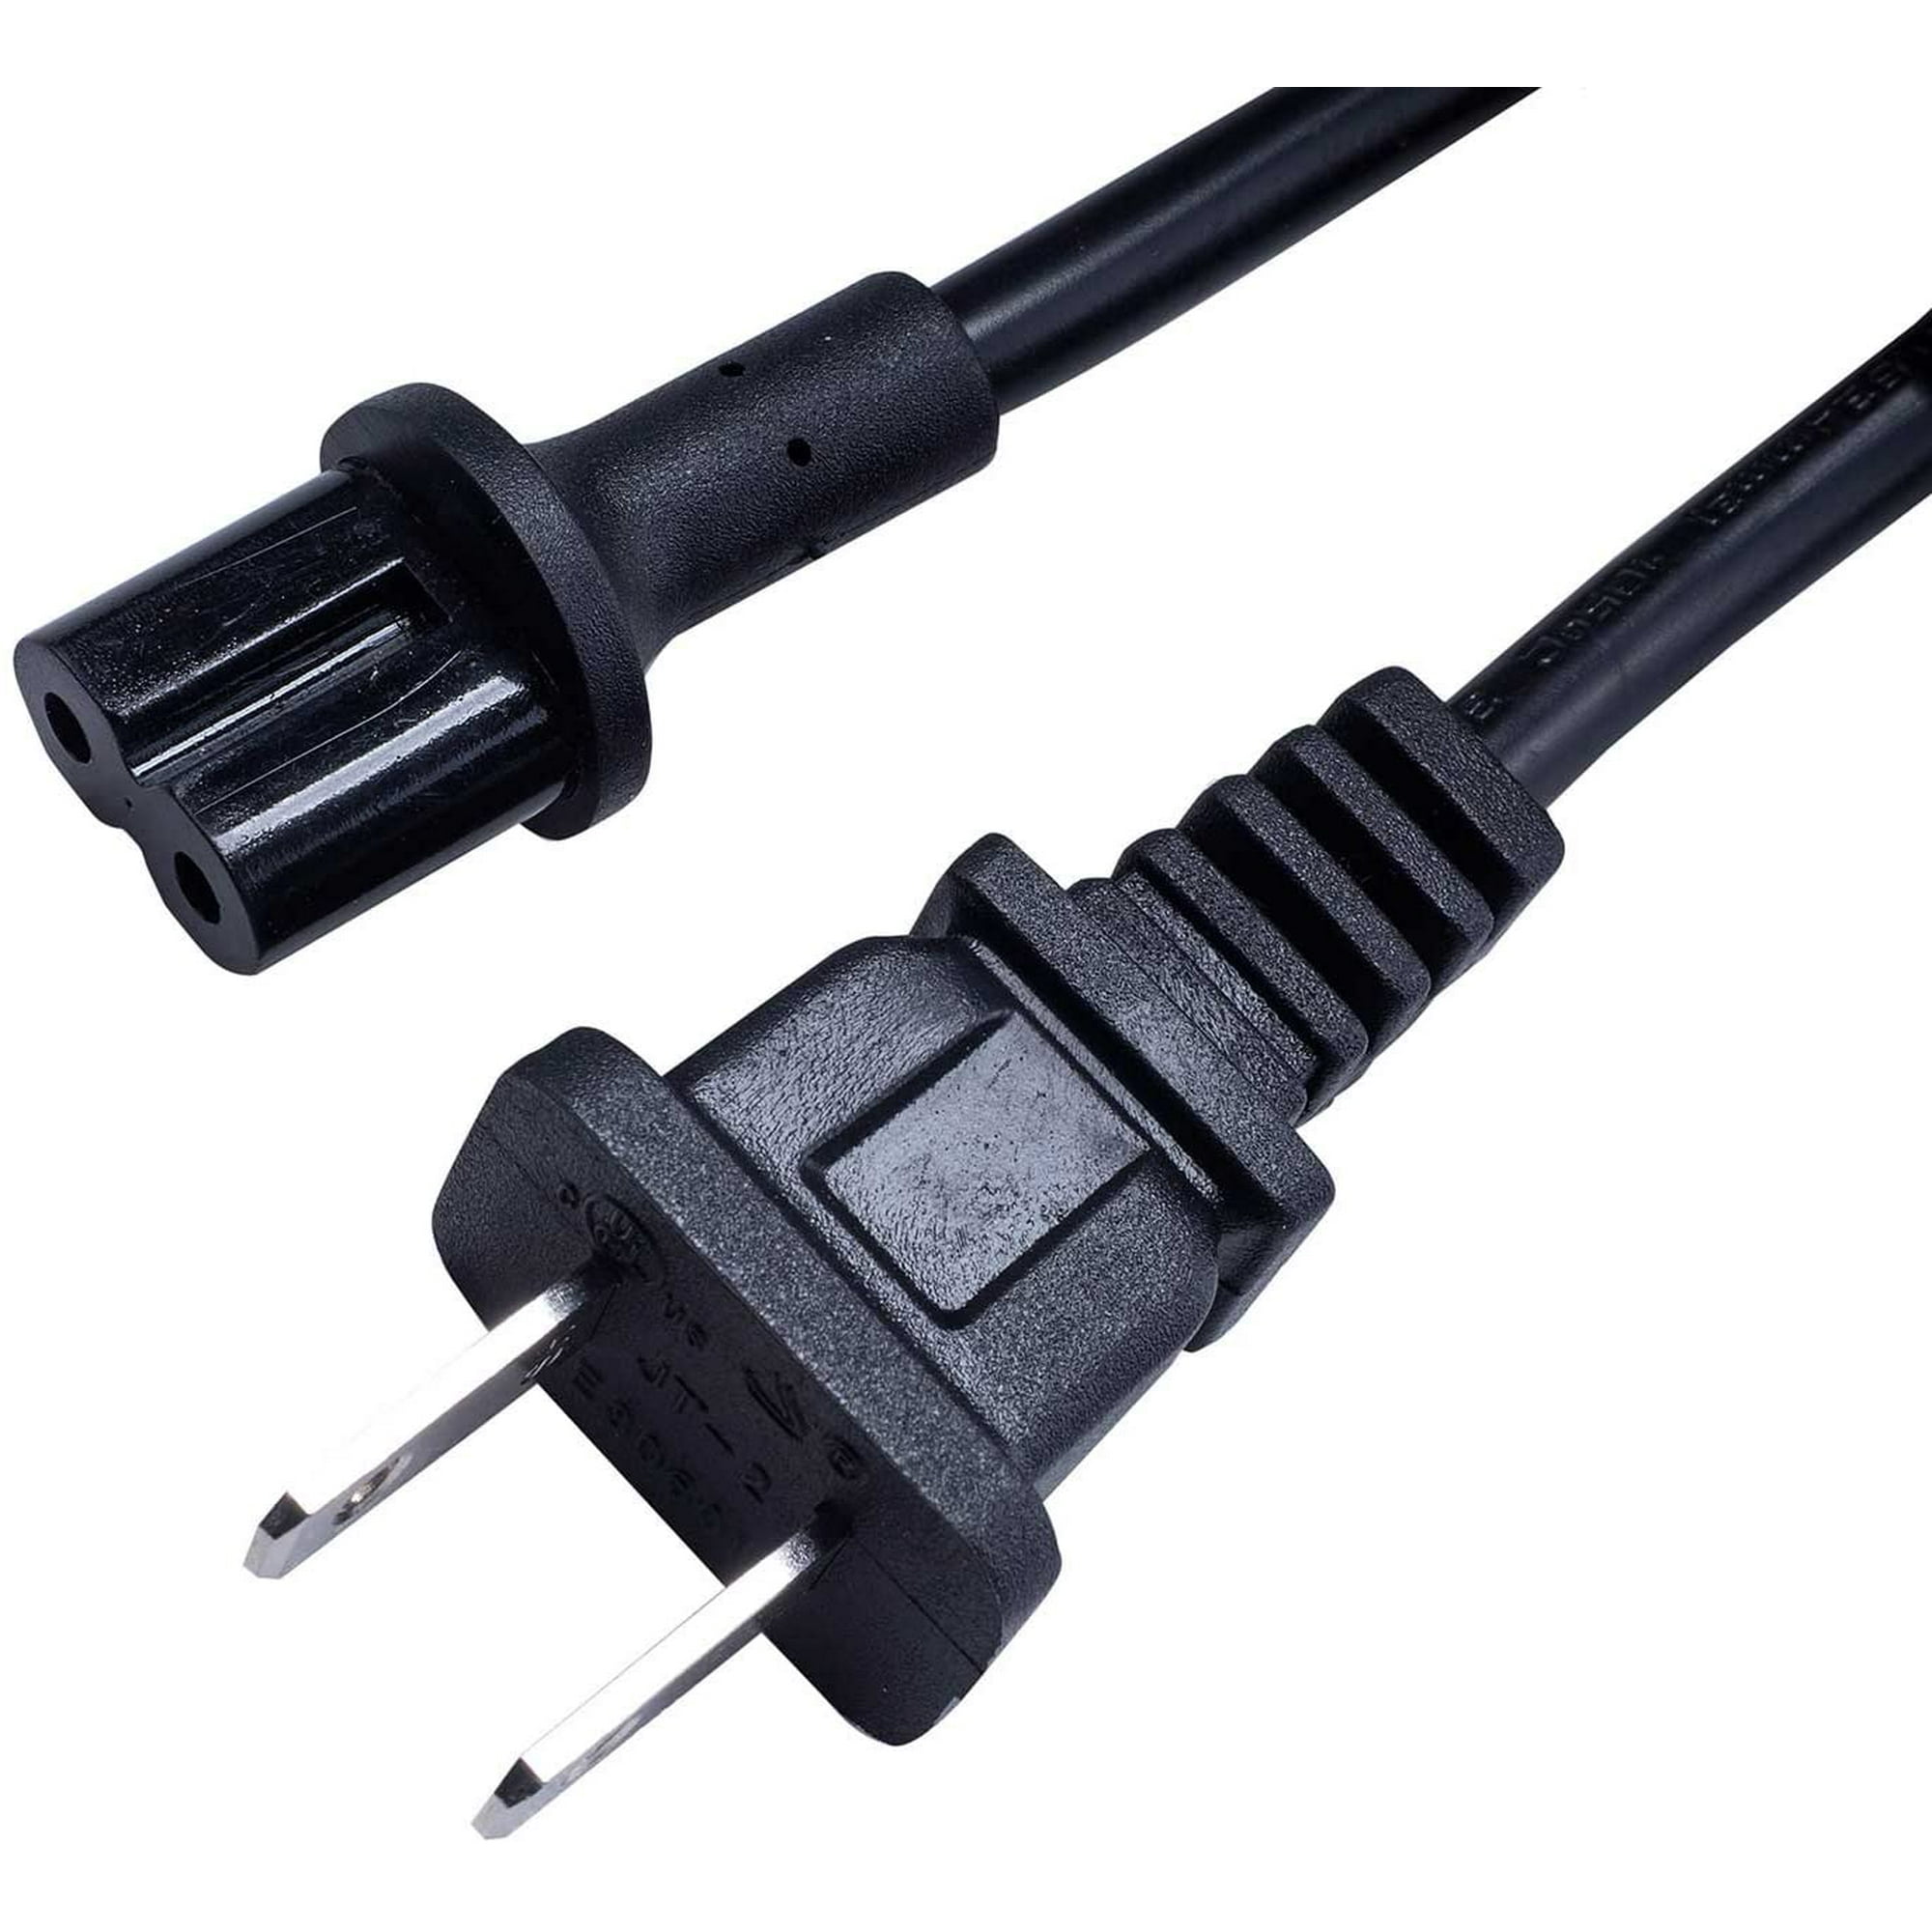 Power Cable Beam Black 196 inch/5 m Cable Beam Cable 5 Meters - Compatible with Sonos Beam | Walmart Canada